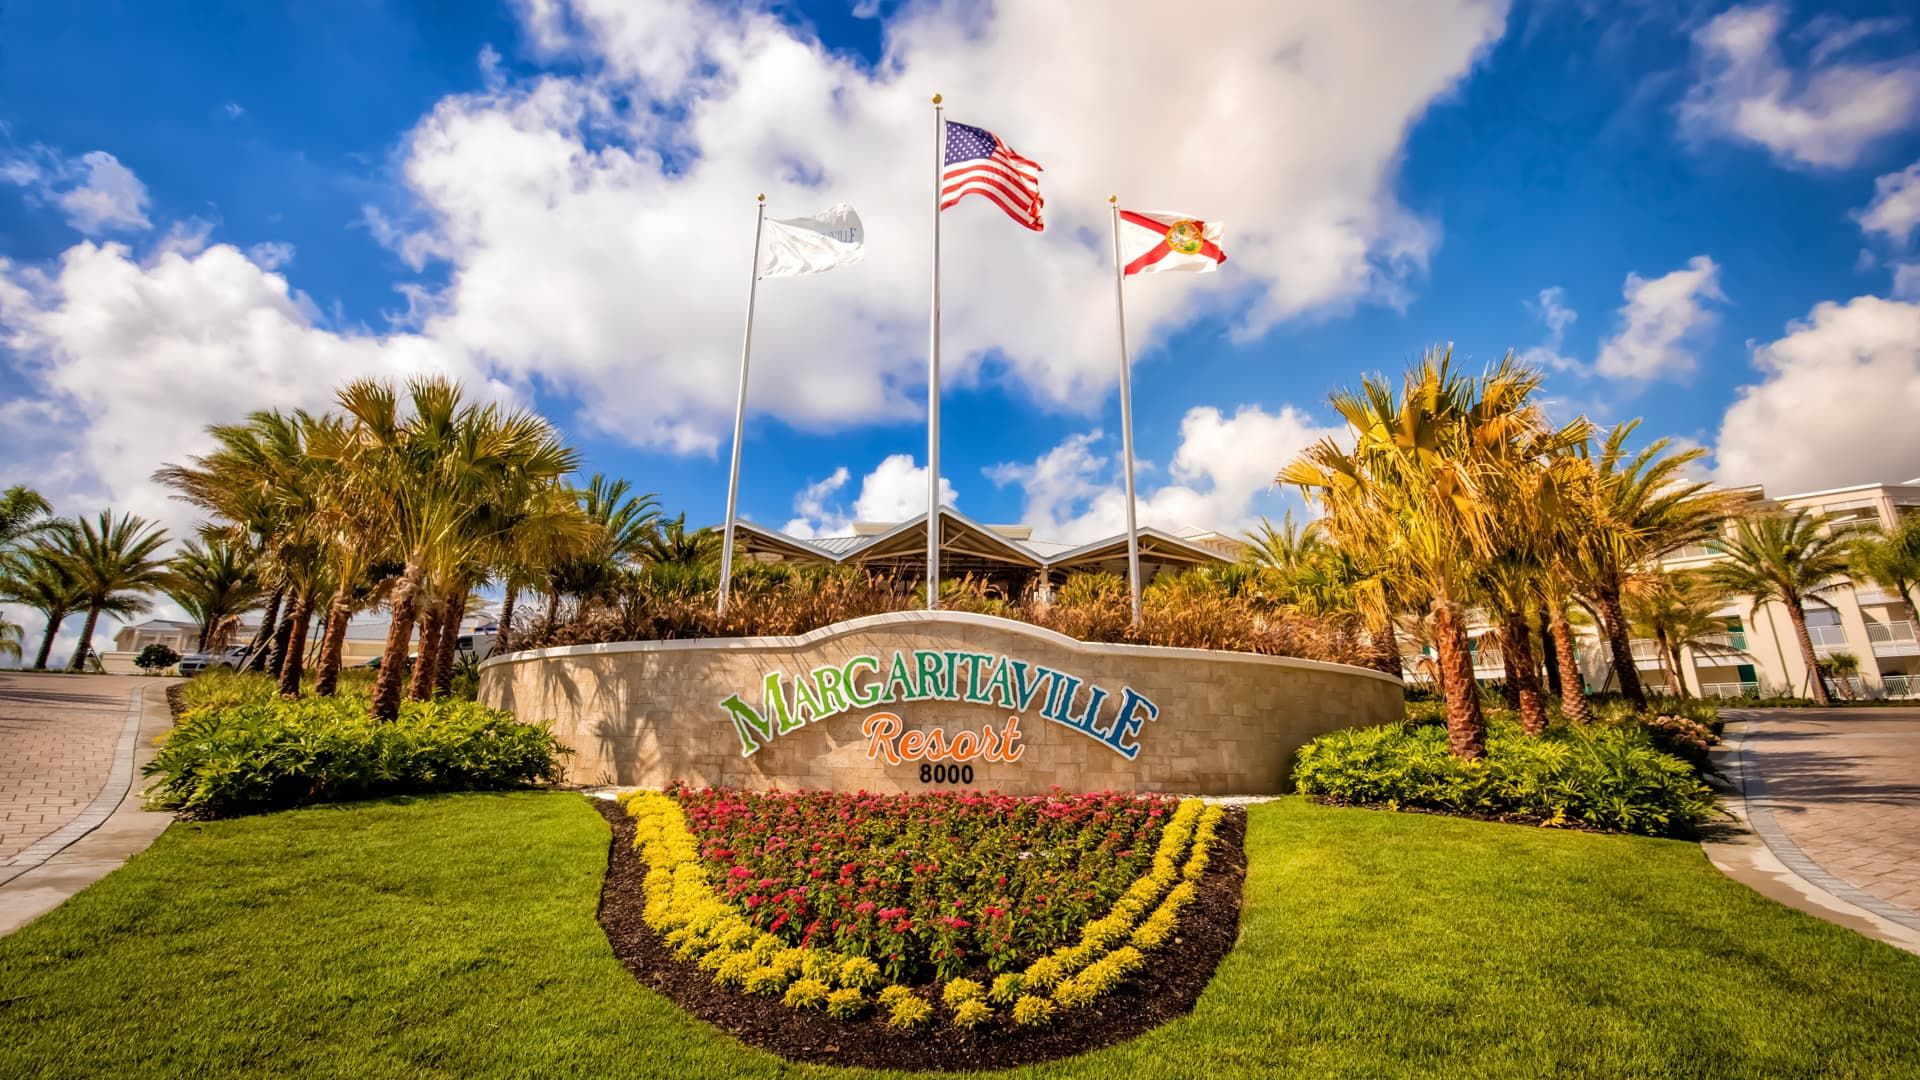 Flags of the United States, Florida, and Margaritaville fly above a garden at the entrance of Margaritaville Resort Orlando.